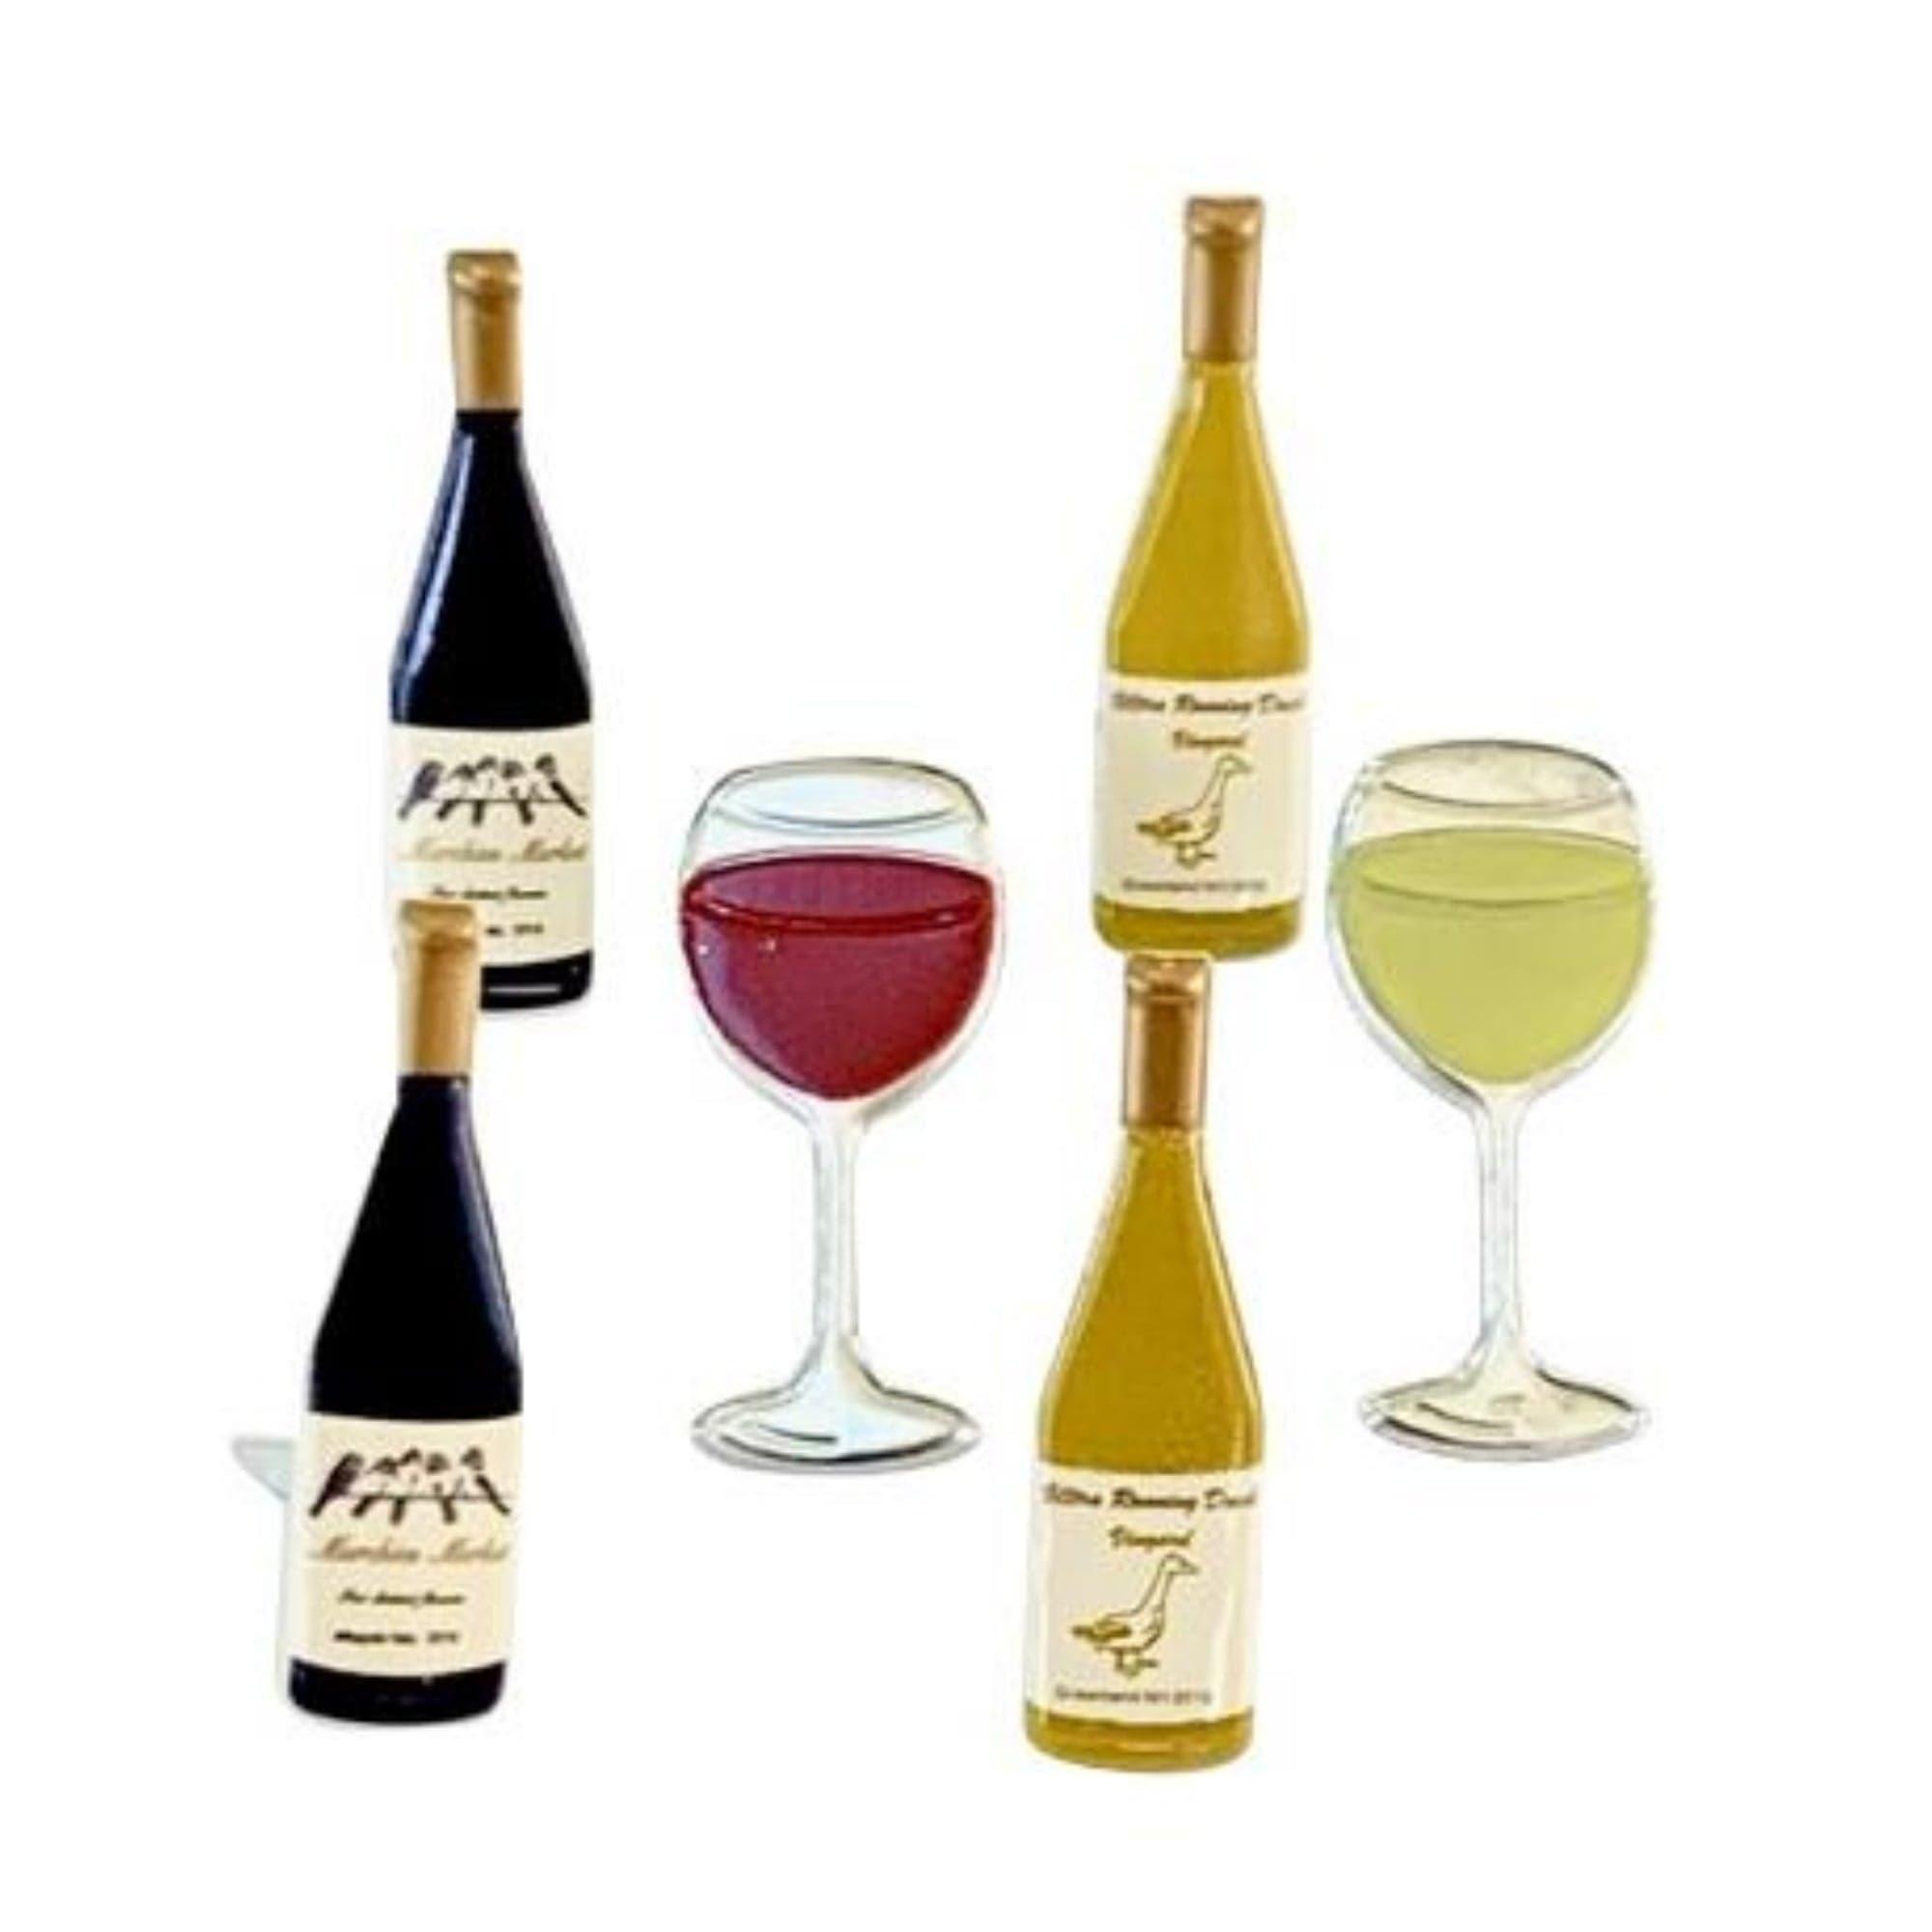 Wine Bottles and Glasses Brads by Eyelet Outlet - Pkg. of 12